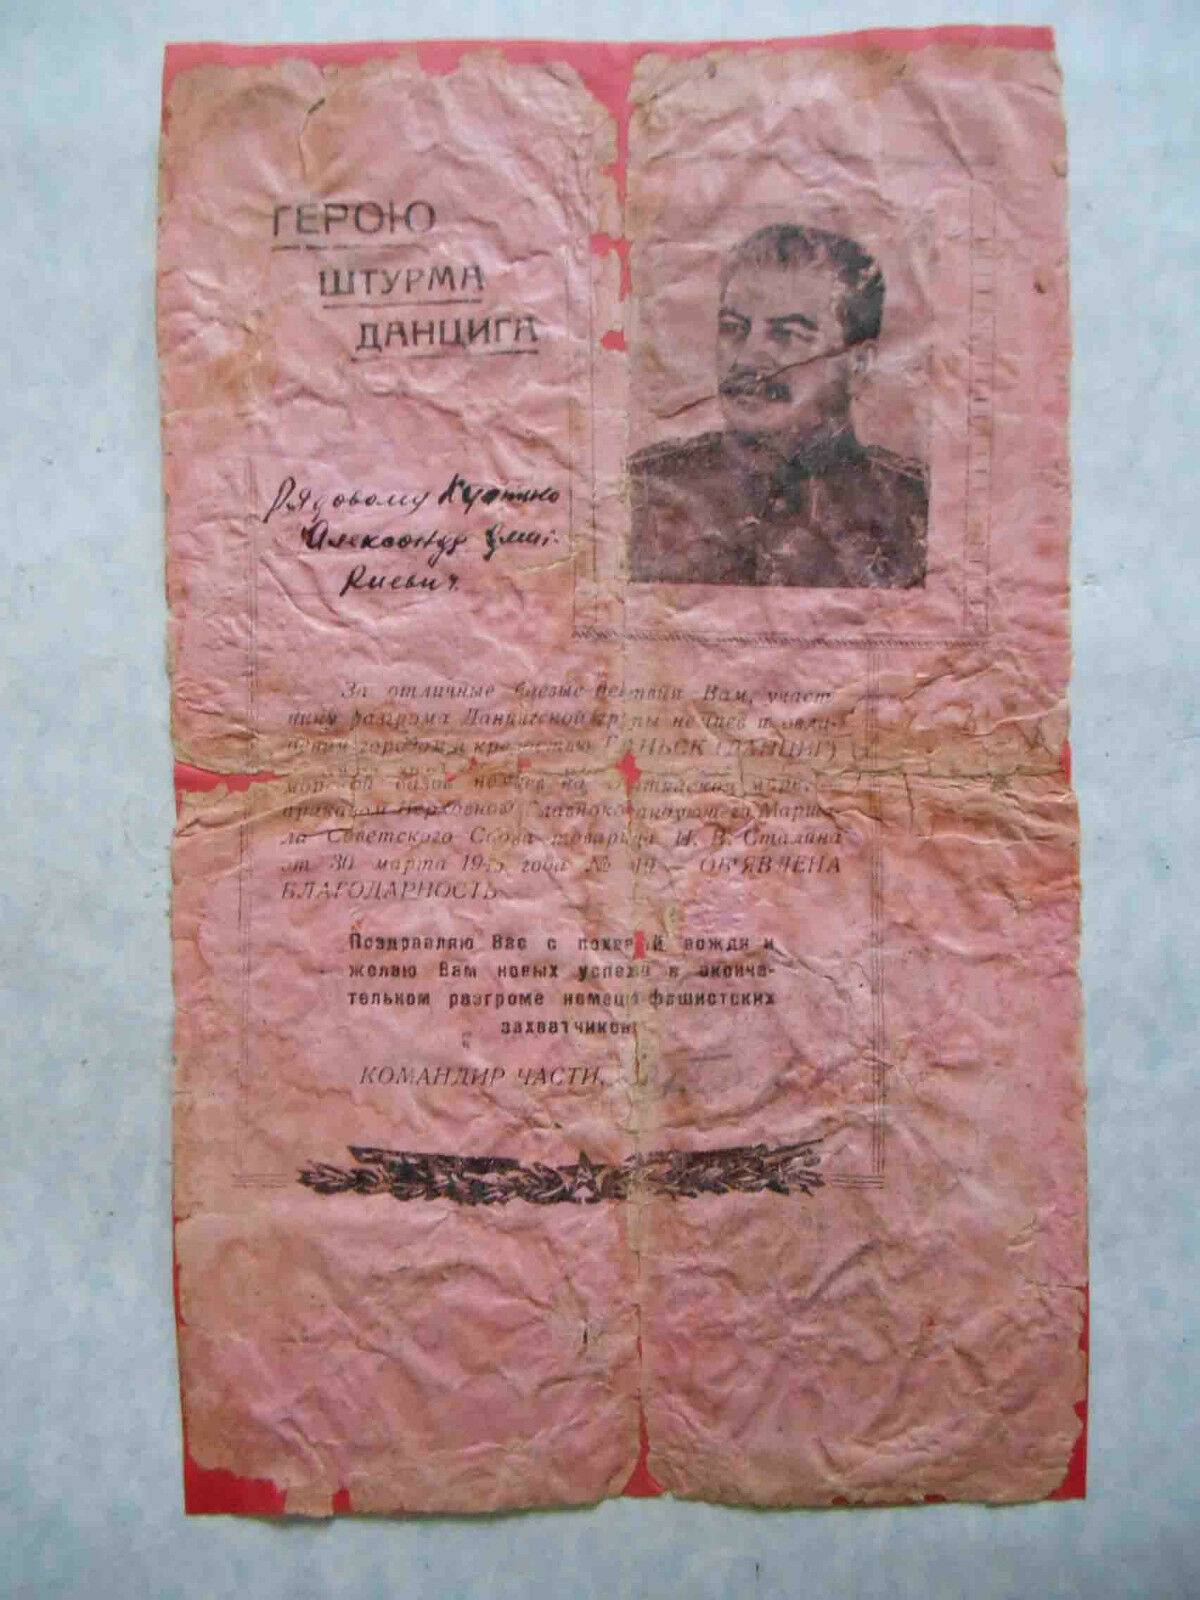 Poland, Russia 1945 Capture Danzig Gdansk. Thanksgiven Document With Stalin.